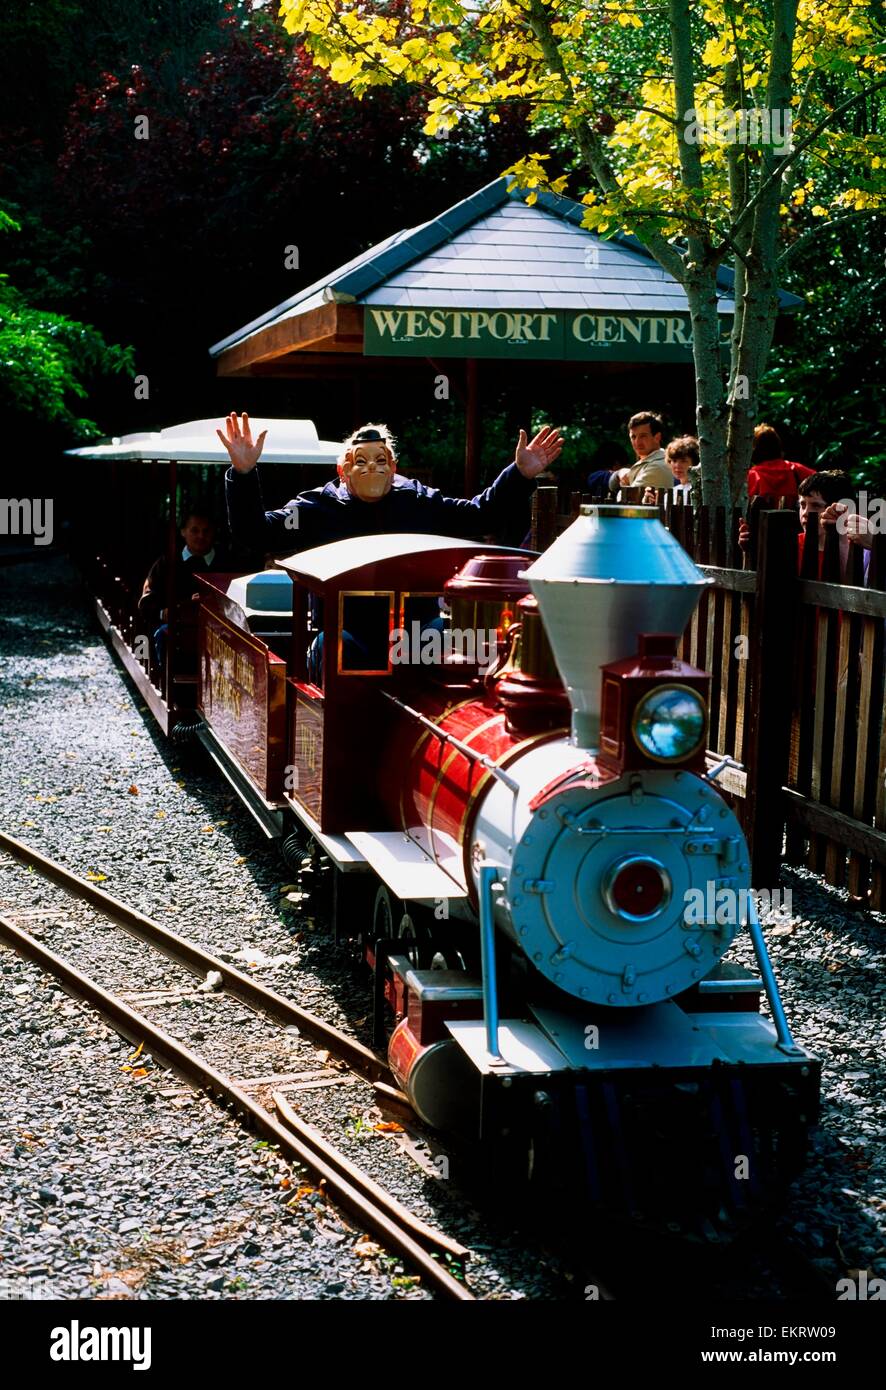 Westport,Co Mayo,Ireland;Person Riding On Model Train By Westport House Stock Photo